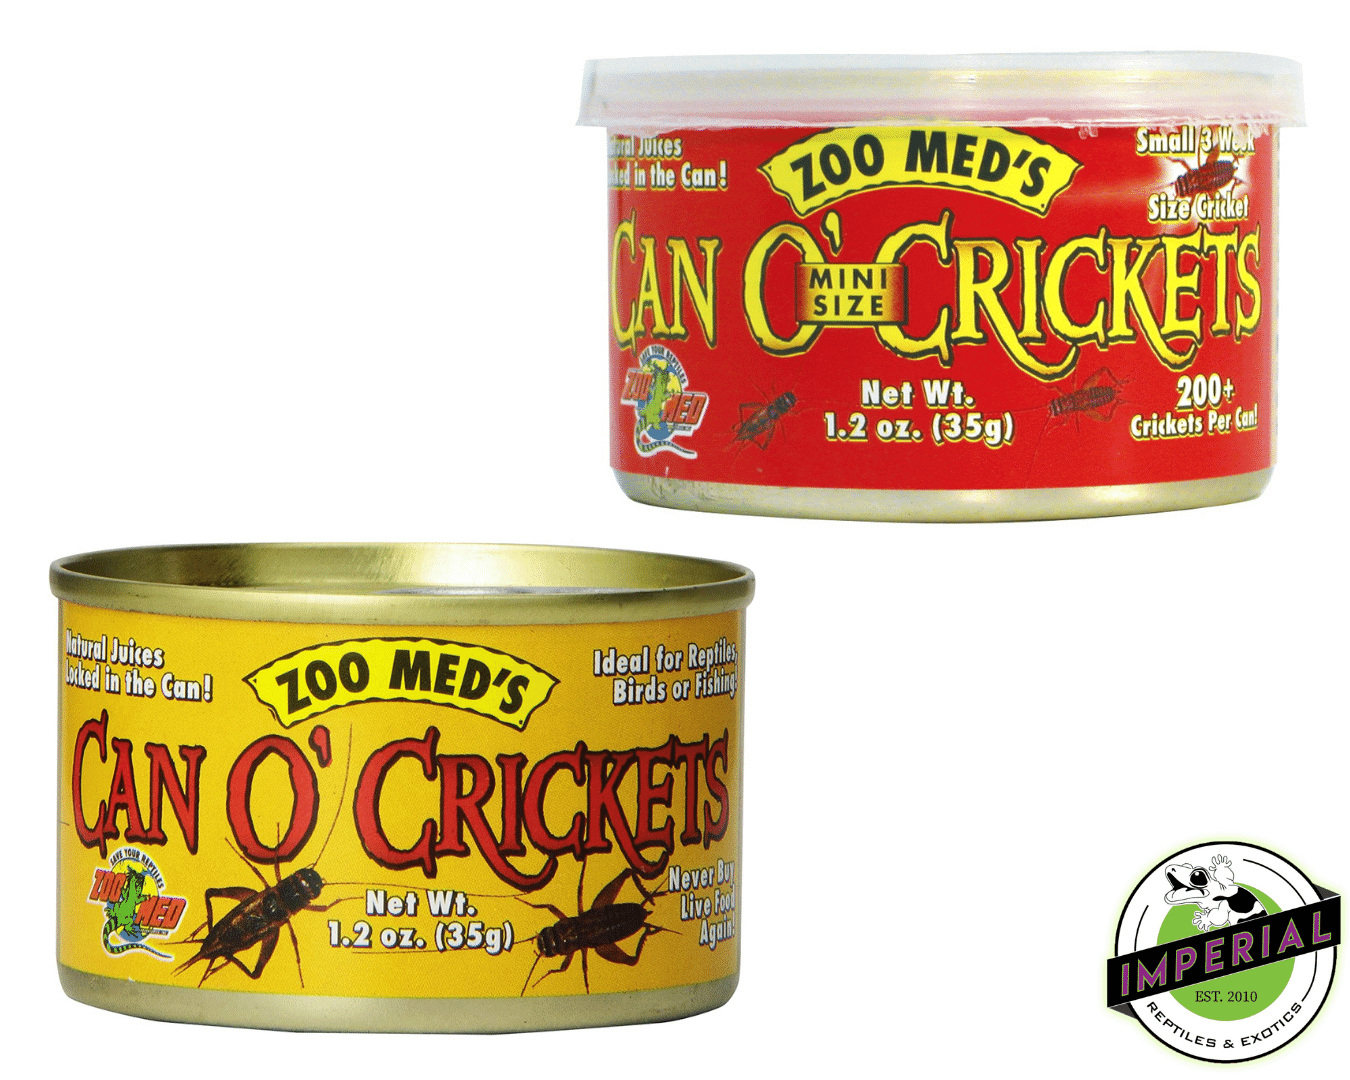 Buy canned cricket for sale online at cheap prices. 